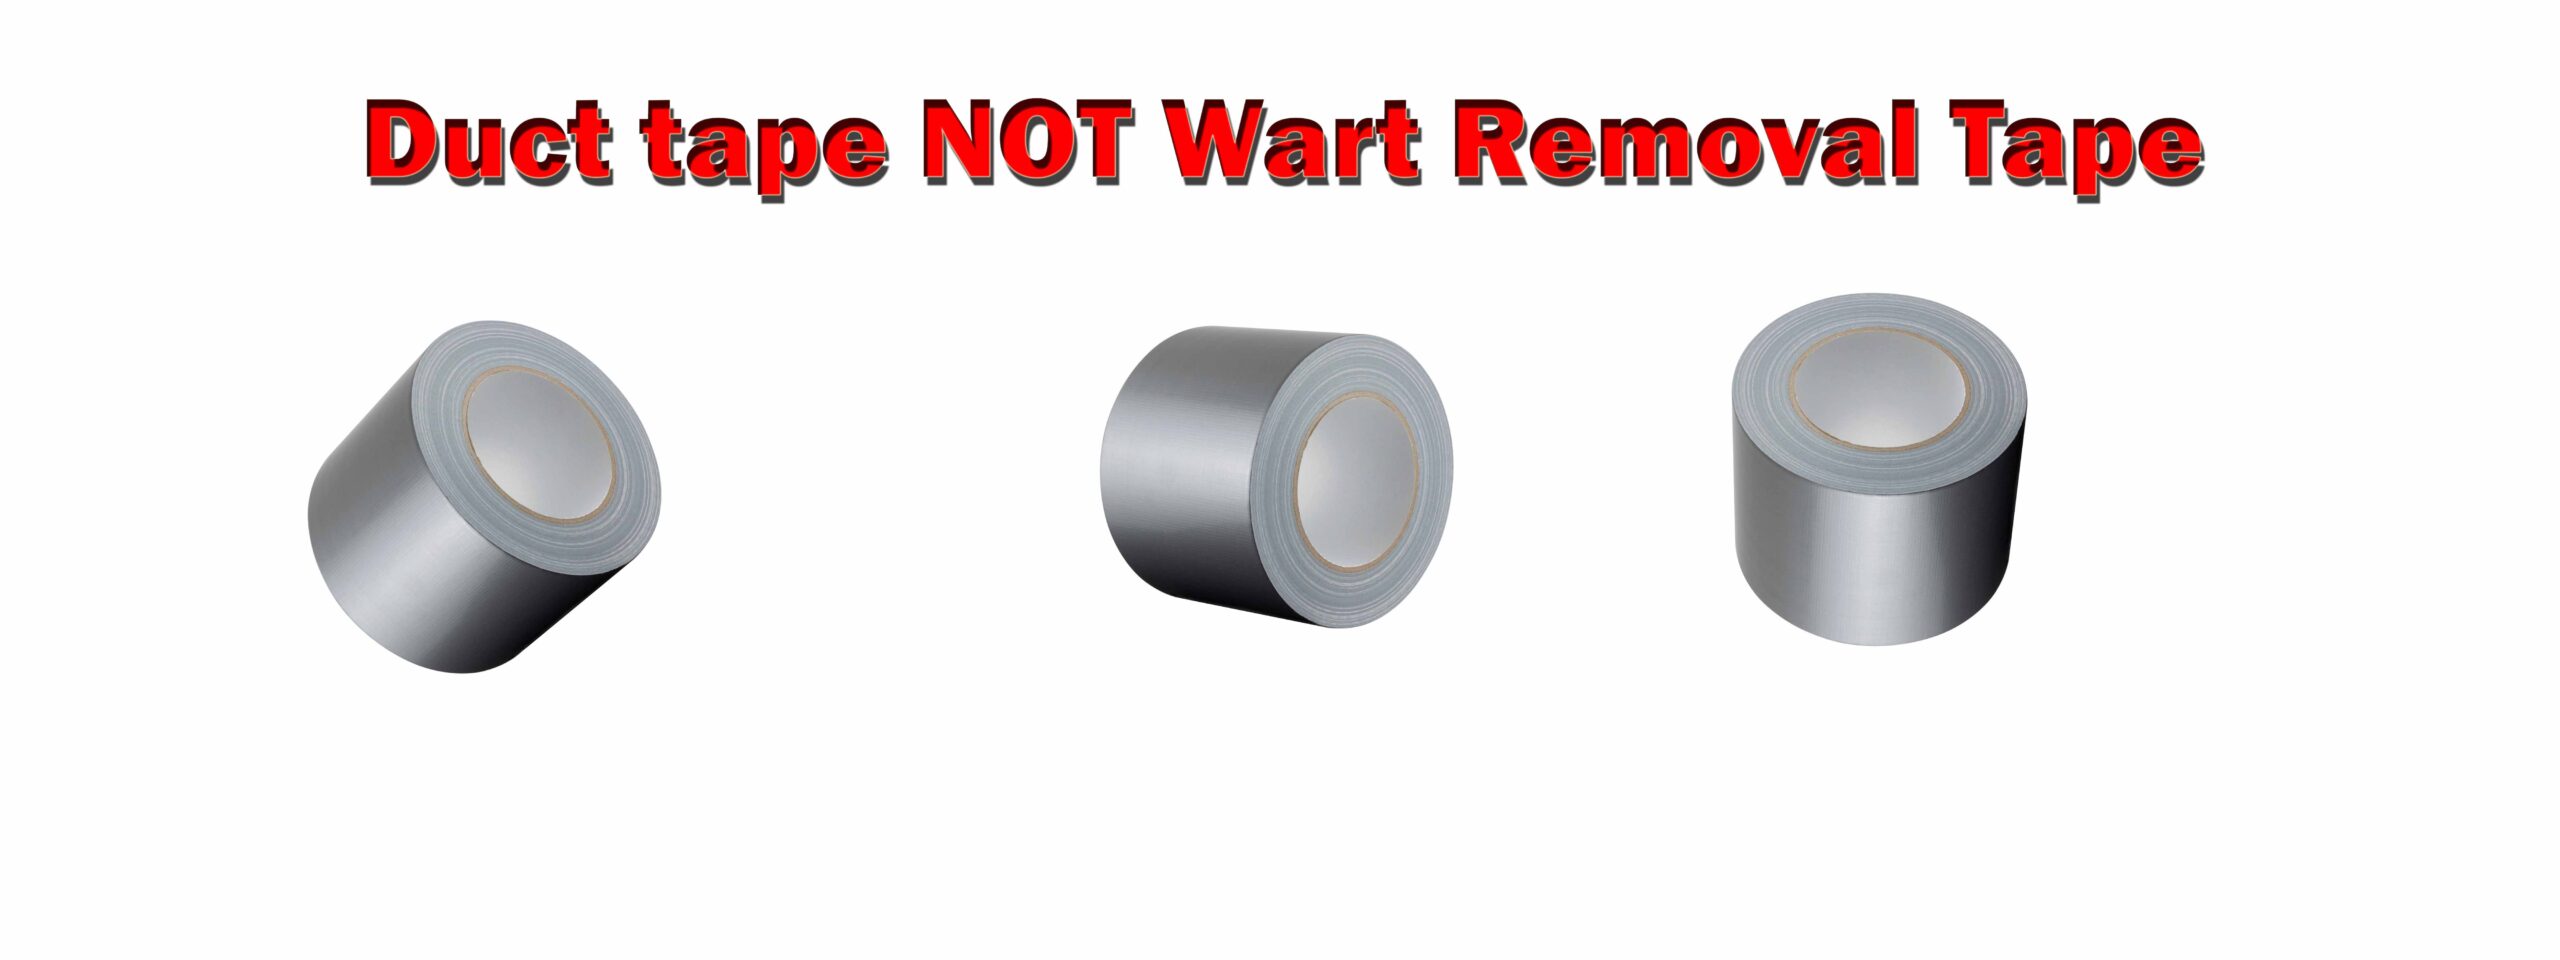 Wart Removal with Duct Tape